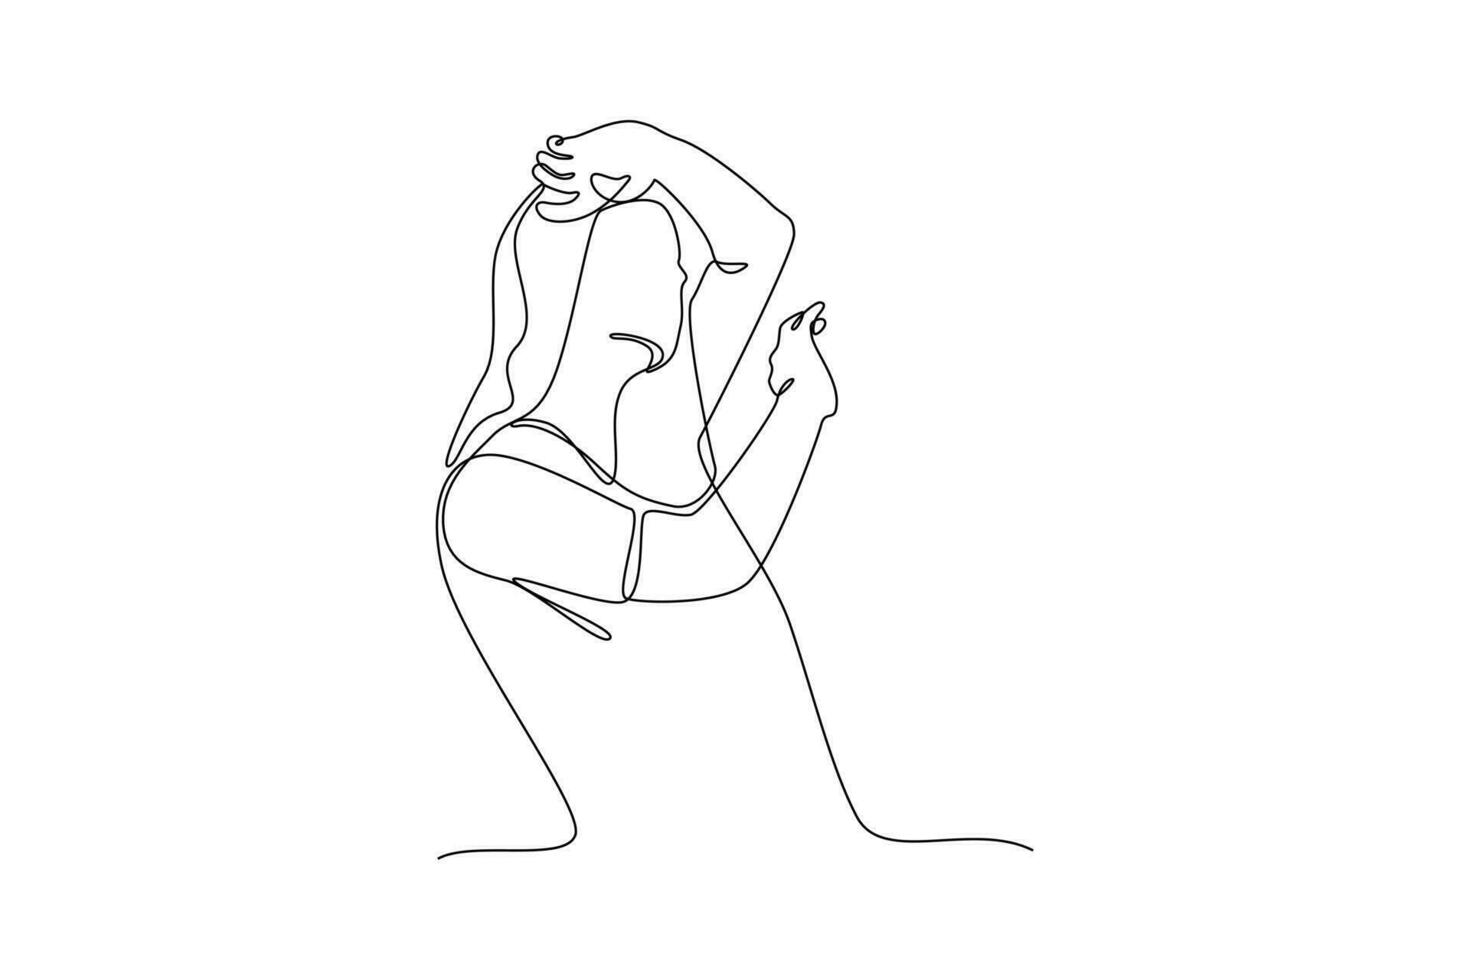 Continuous one line drawing Happy female activity concept. Doodle vector illustration.